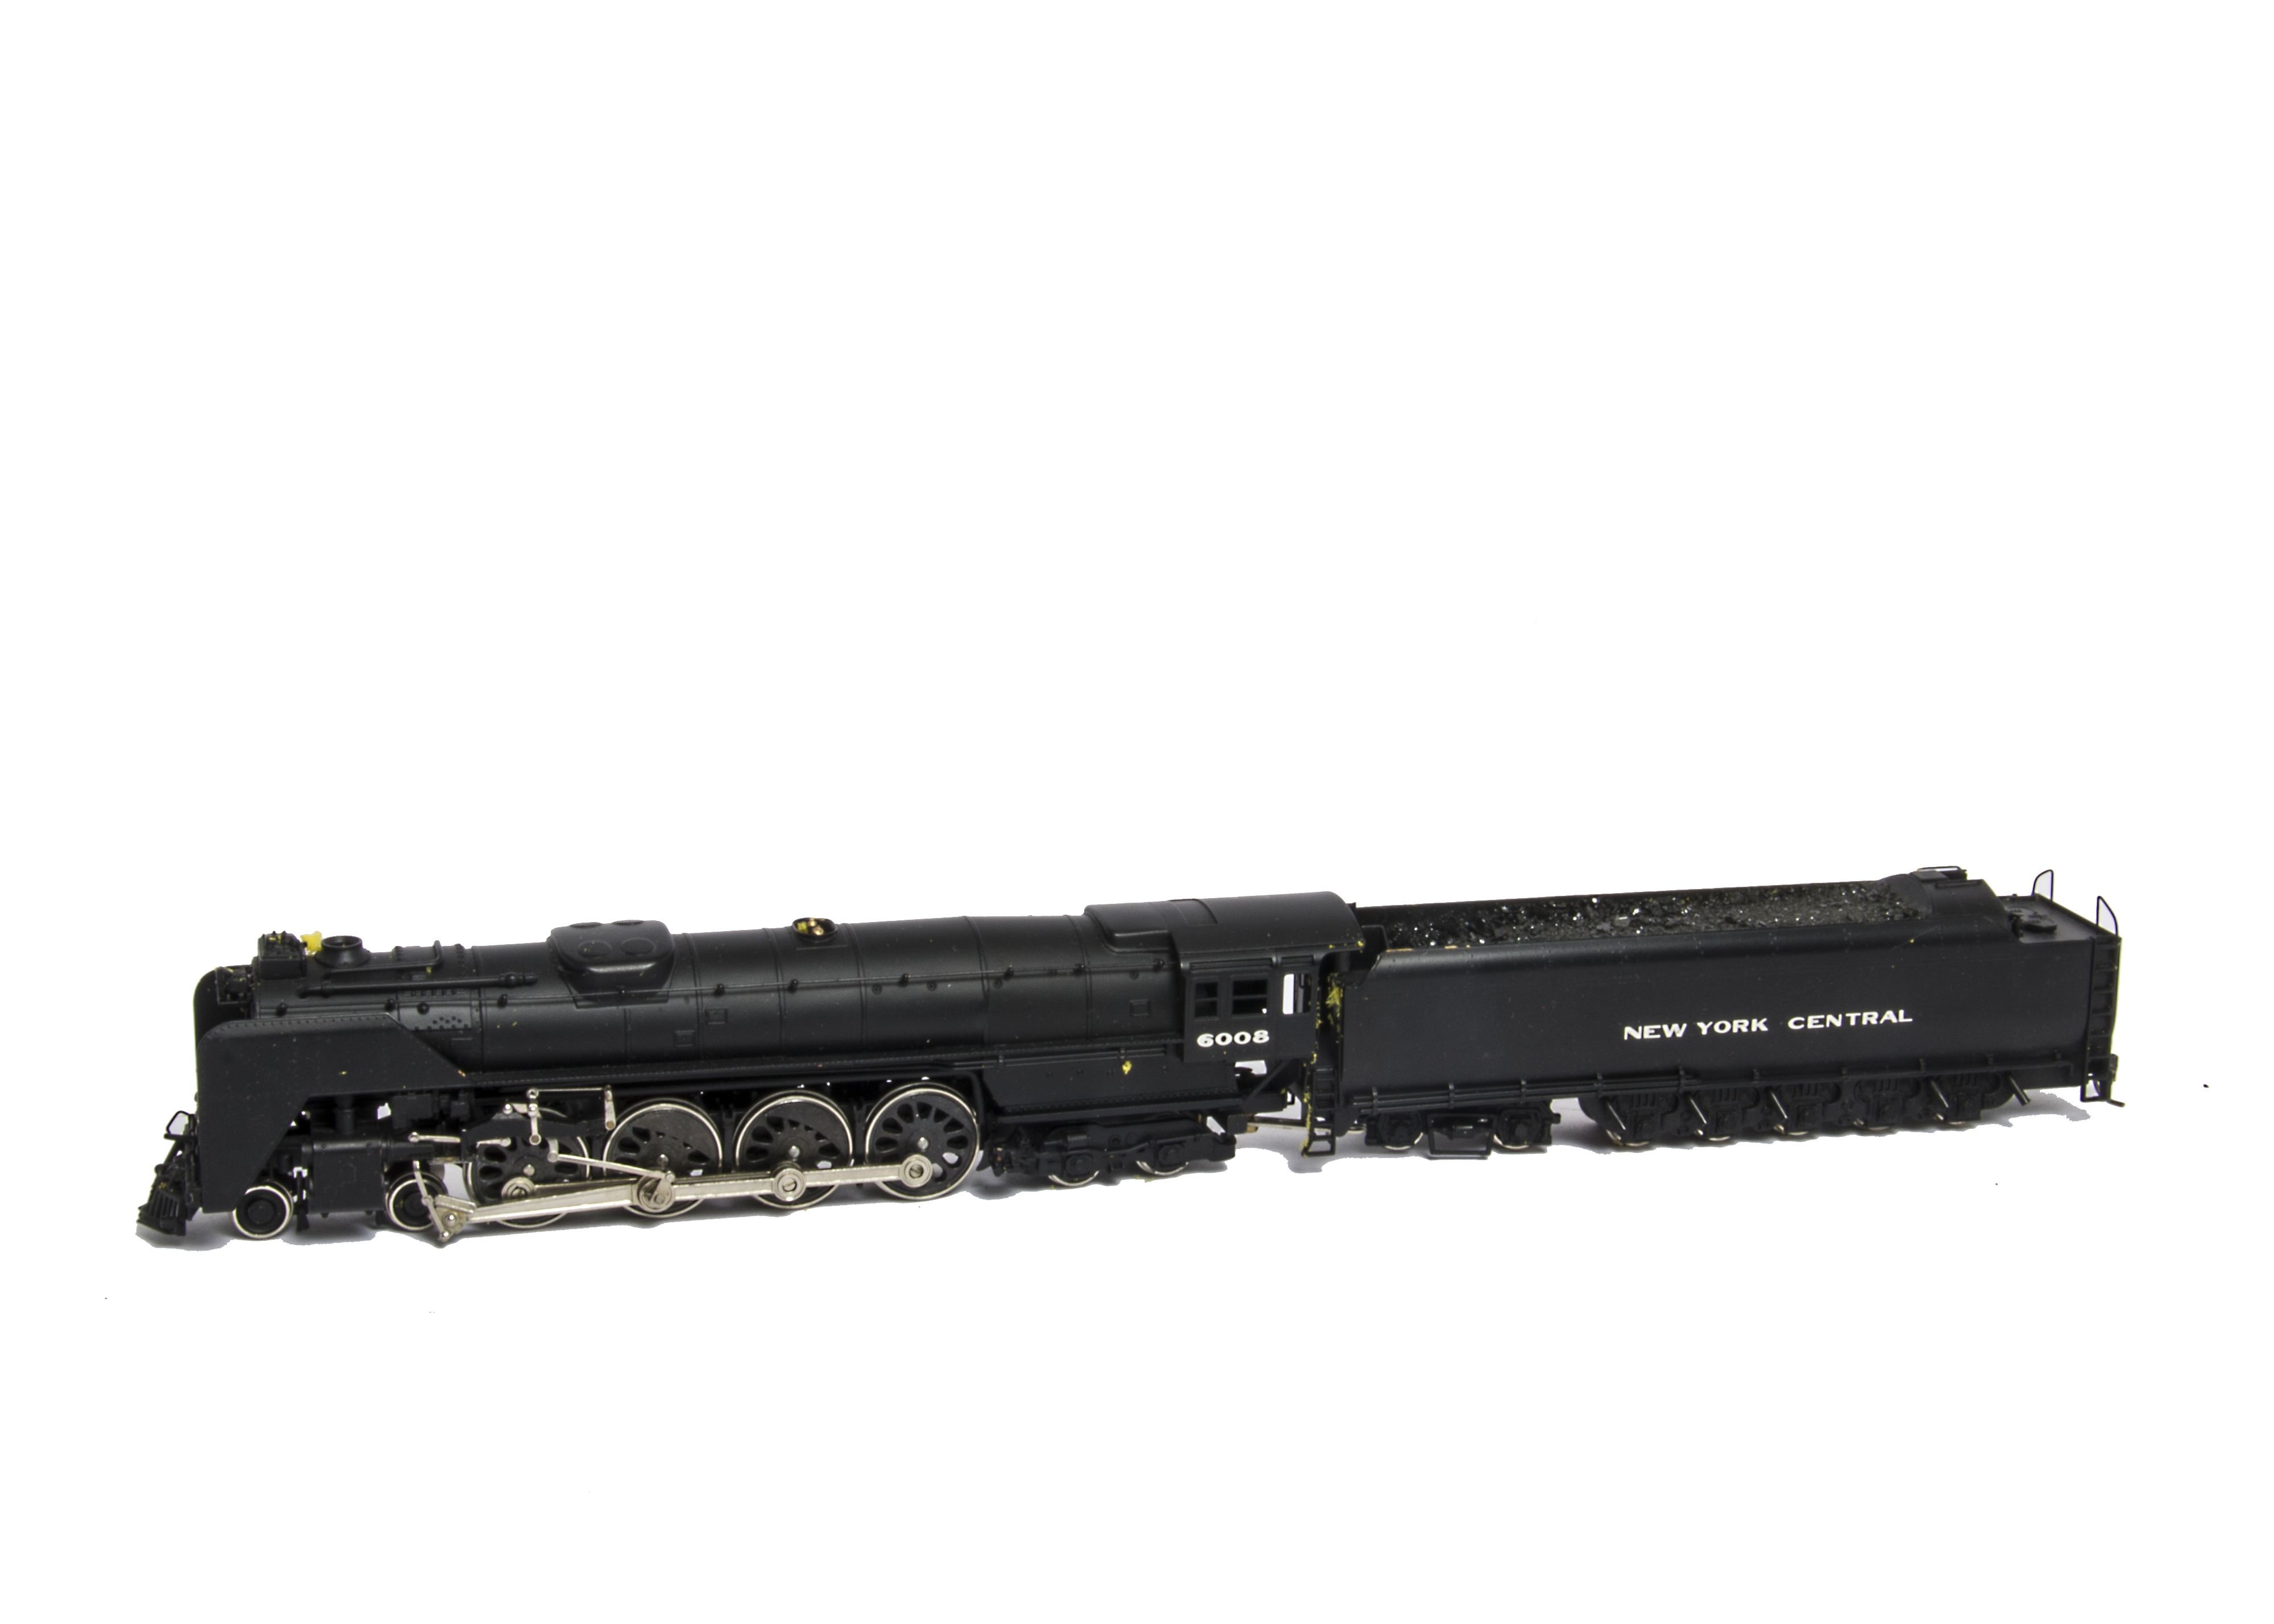 A Nickel Plate Products (KMT) H0 Gauge New York Central ‘Niagara’ 4-8-4 Steam Locomotive and Tender,